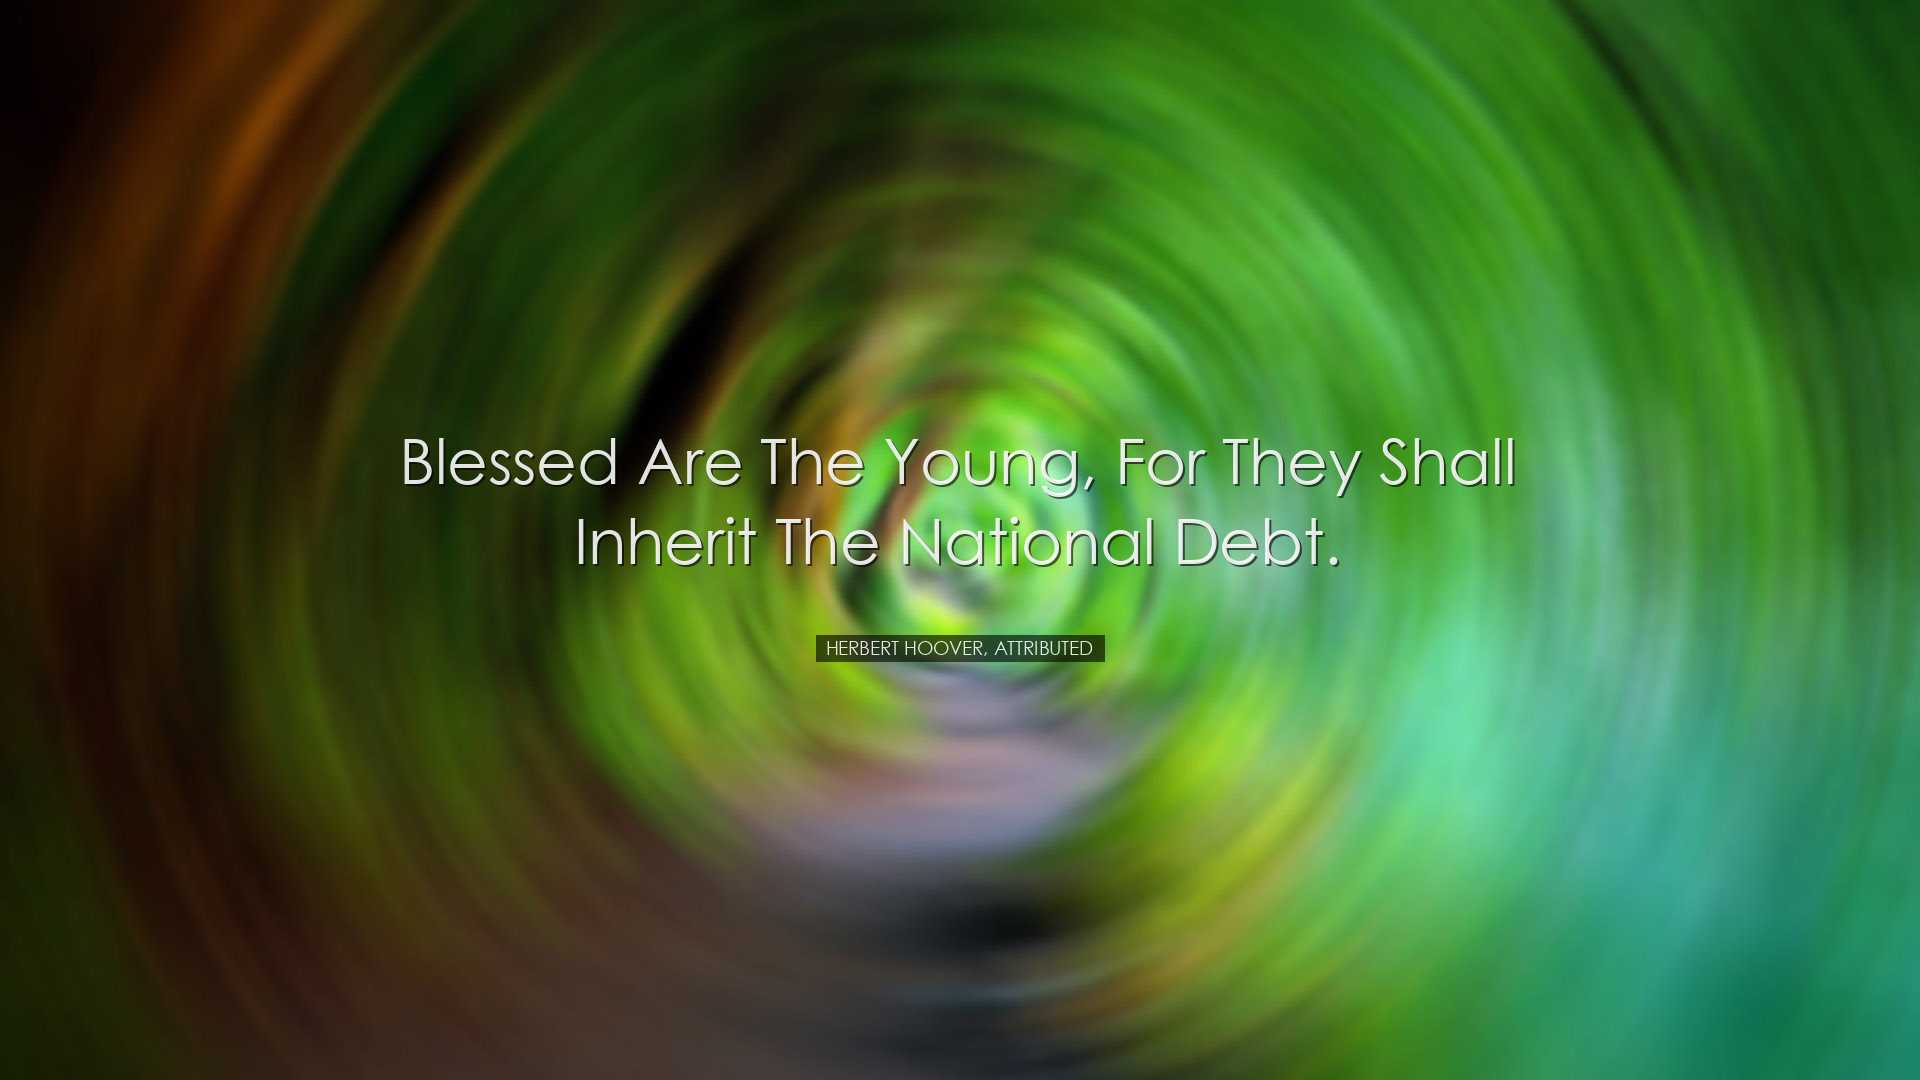 Blessed are the young, for they shall inherit the national debt. -